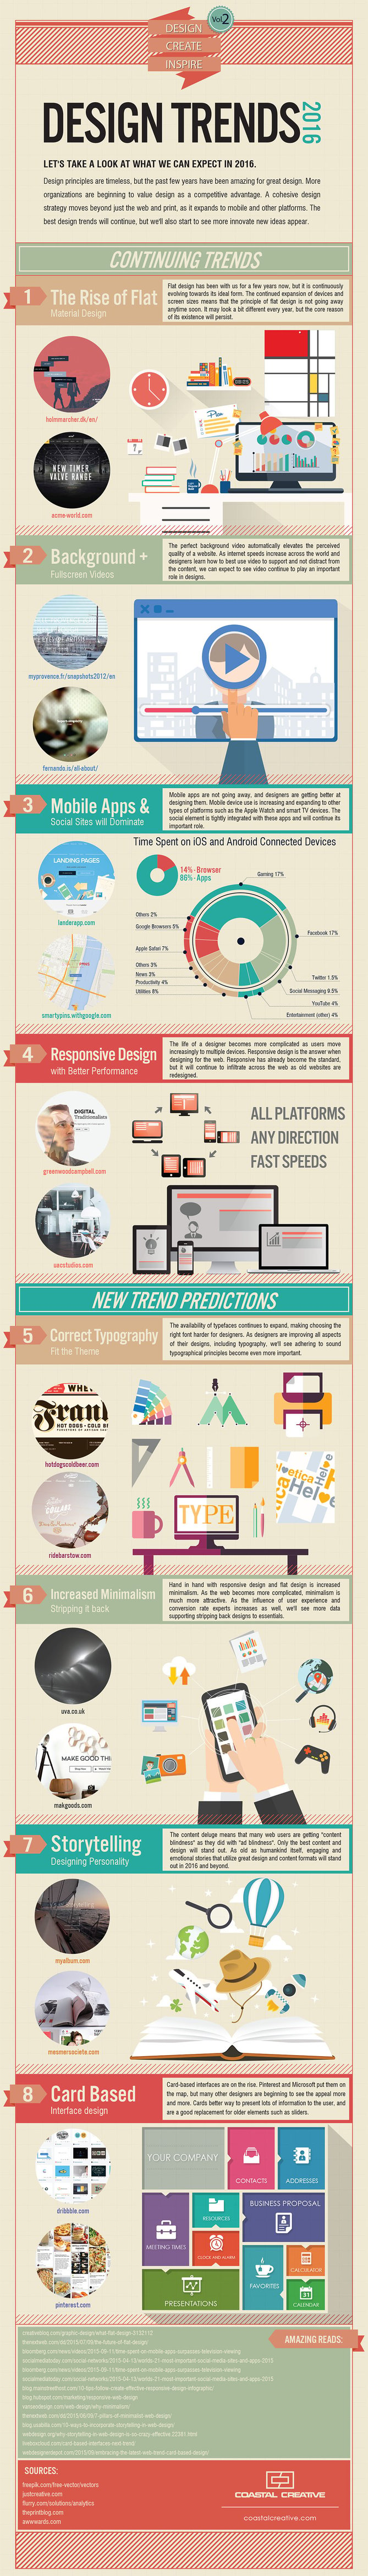 infographic trends